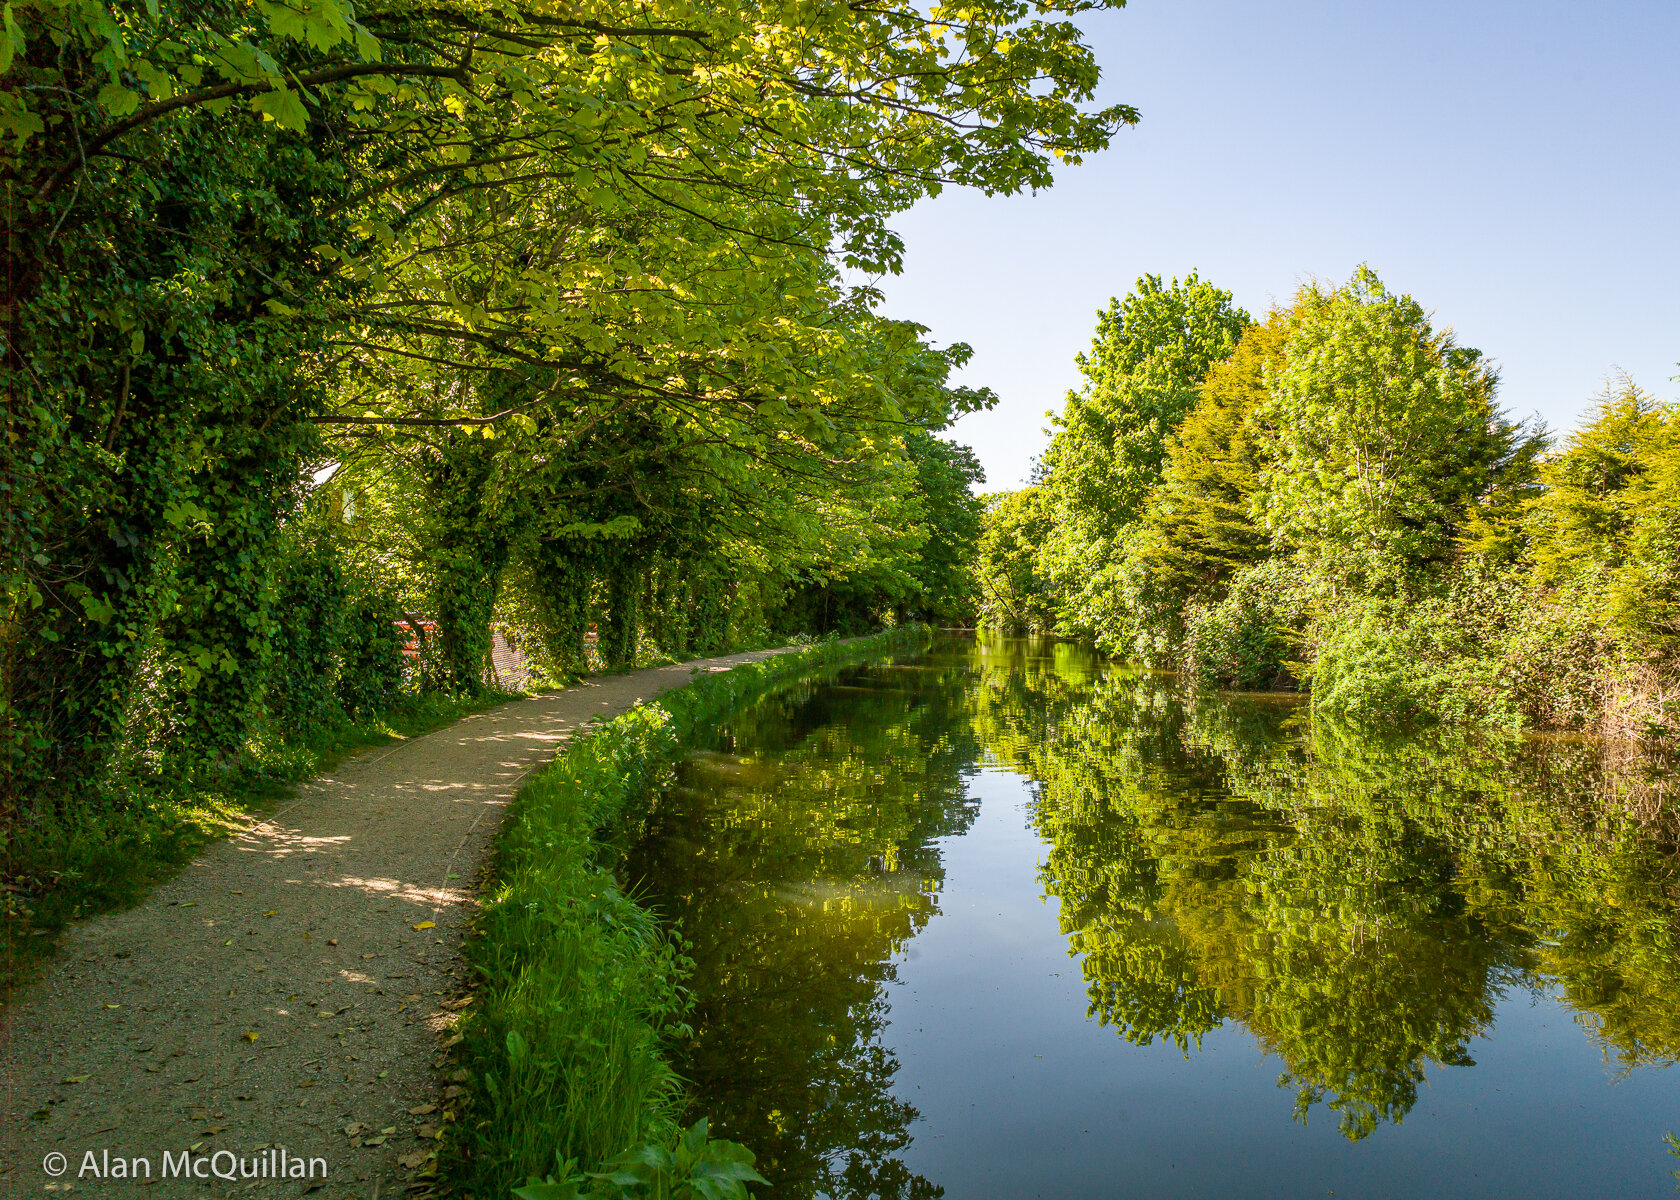 Grand Union Canal at Northchurch, Hertfordshire